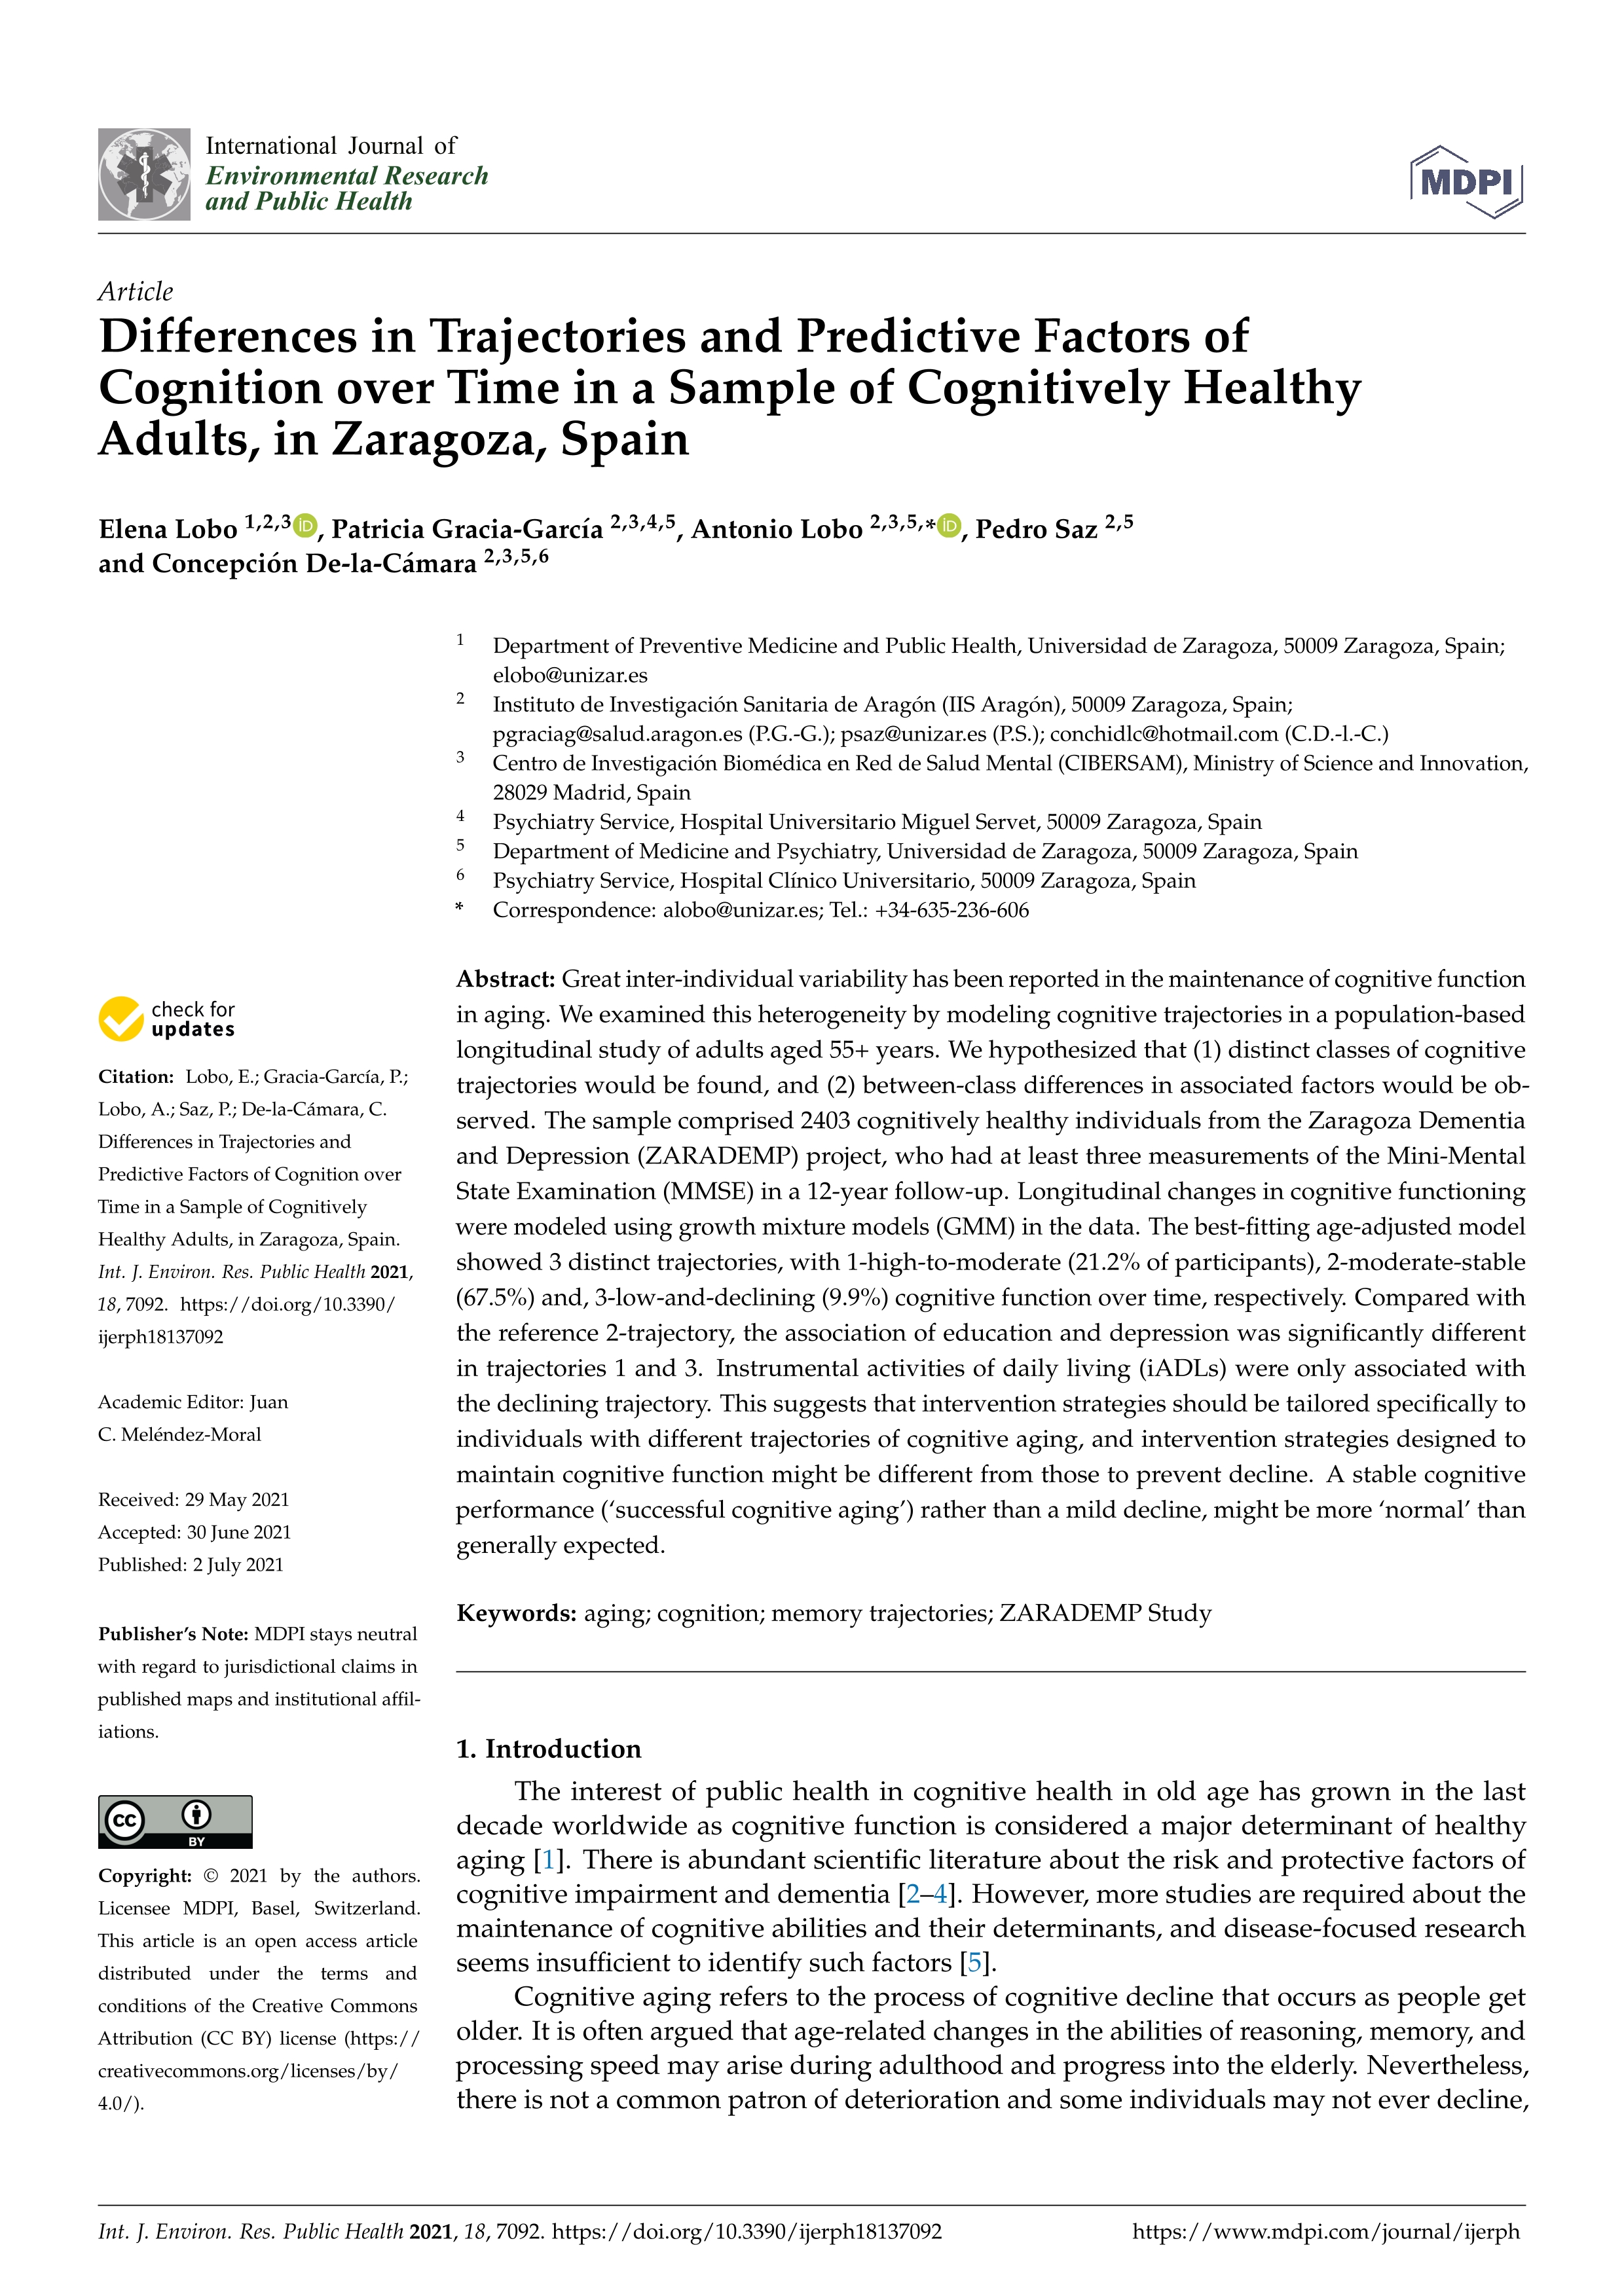 Differences in trajectories and predictive factors of cognition over time in a sample of cognitively healthy adults, in zaragoza, spain